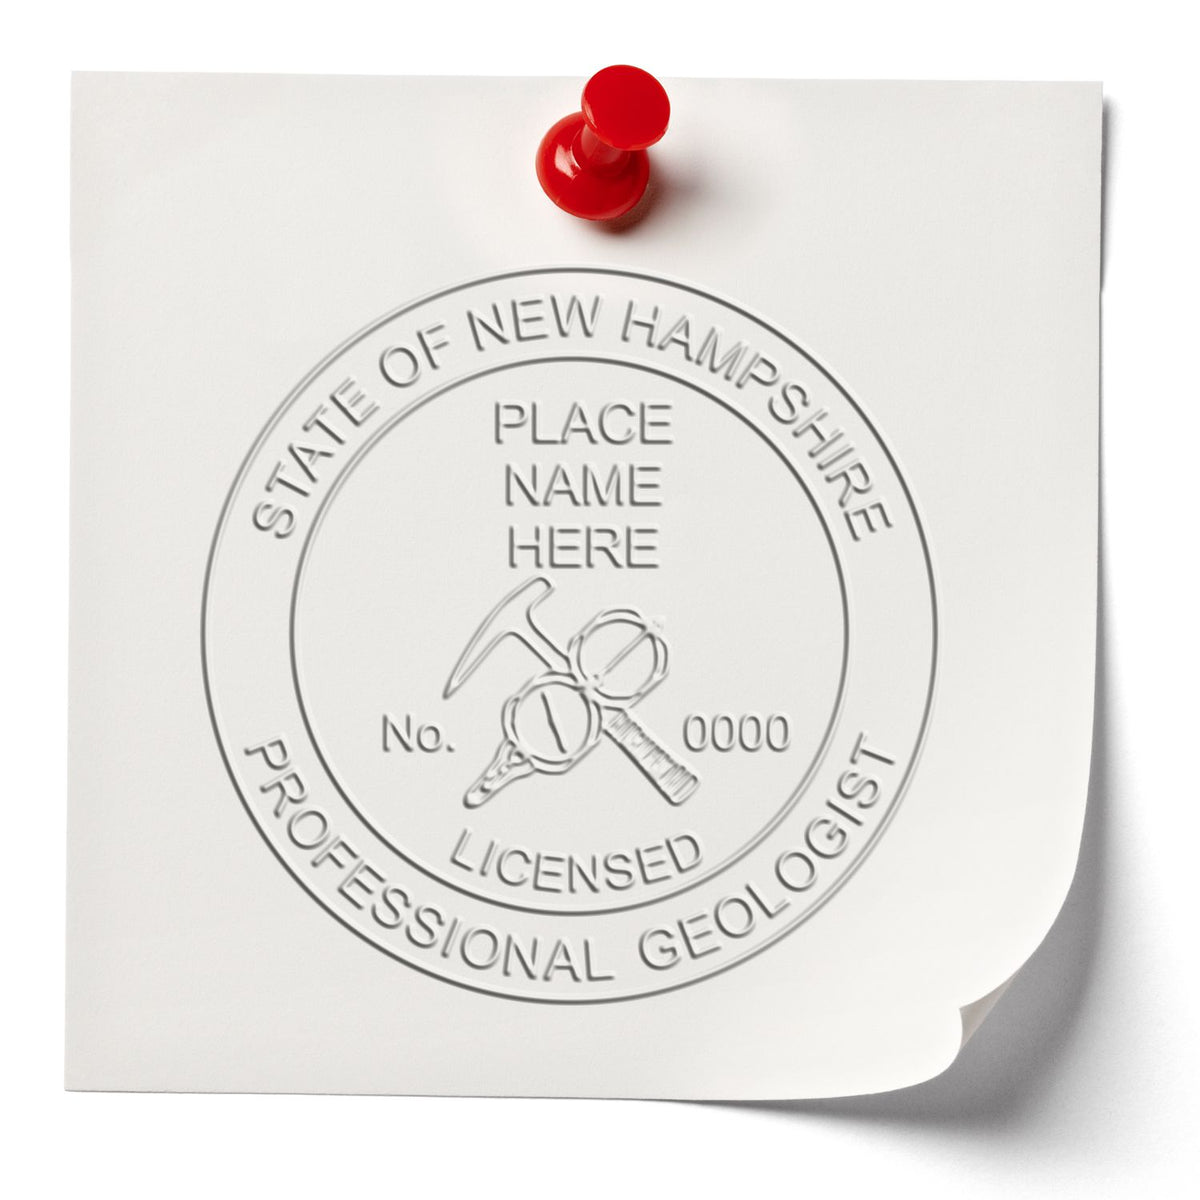 An in use photo of the Gift New Hampshire Geologist Seal showing a sample imprint on a cardstock